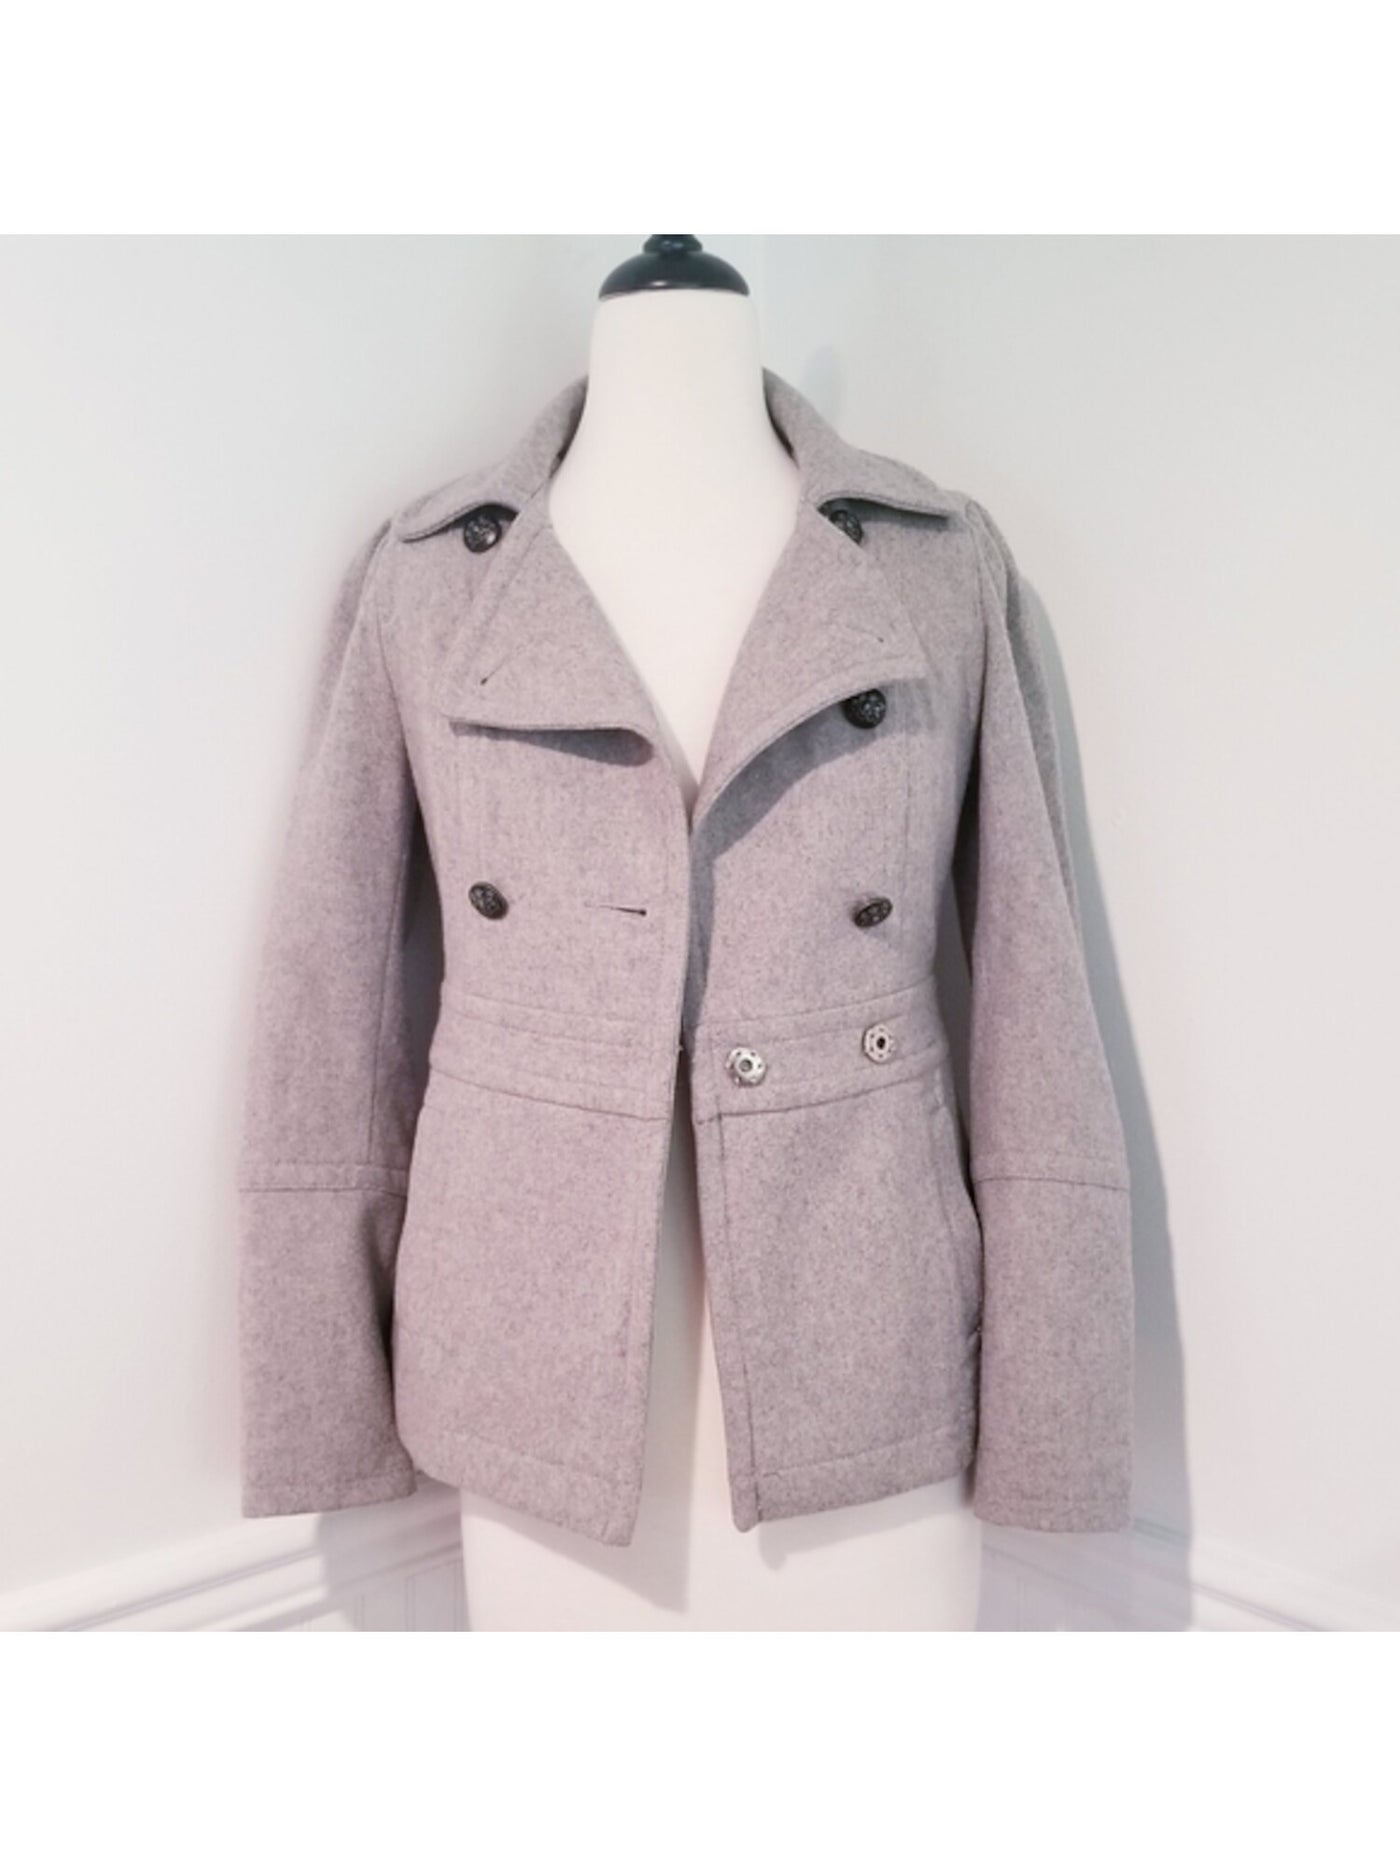 GUESS Womens Gray Pocketed Tweed Double Breasted Peacoat Winter Jacket M